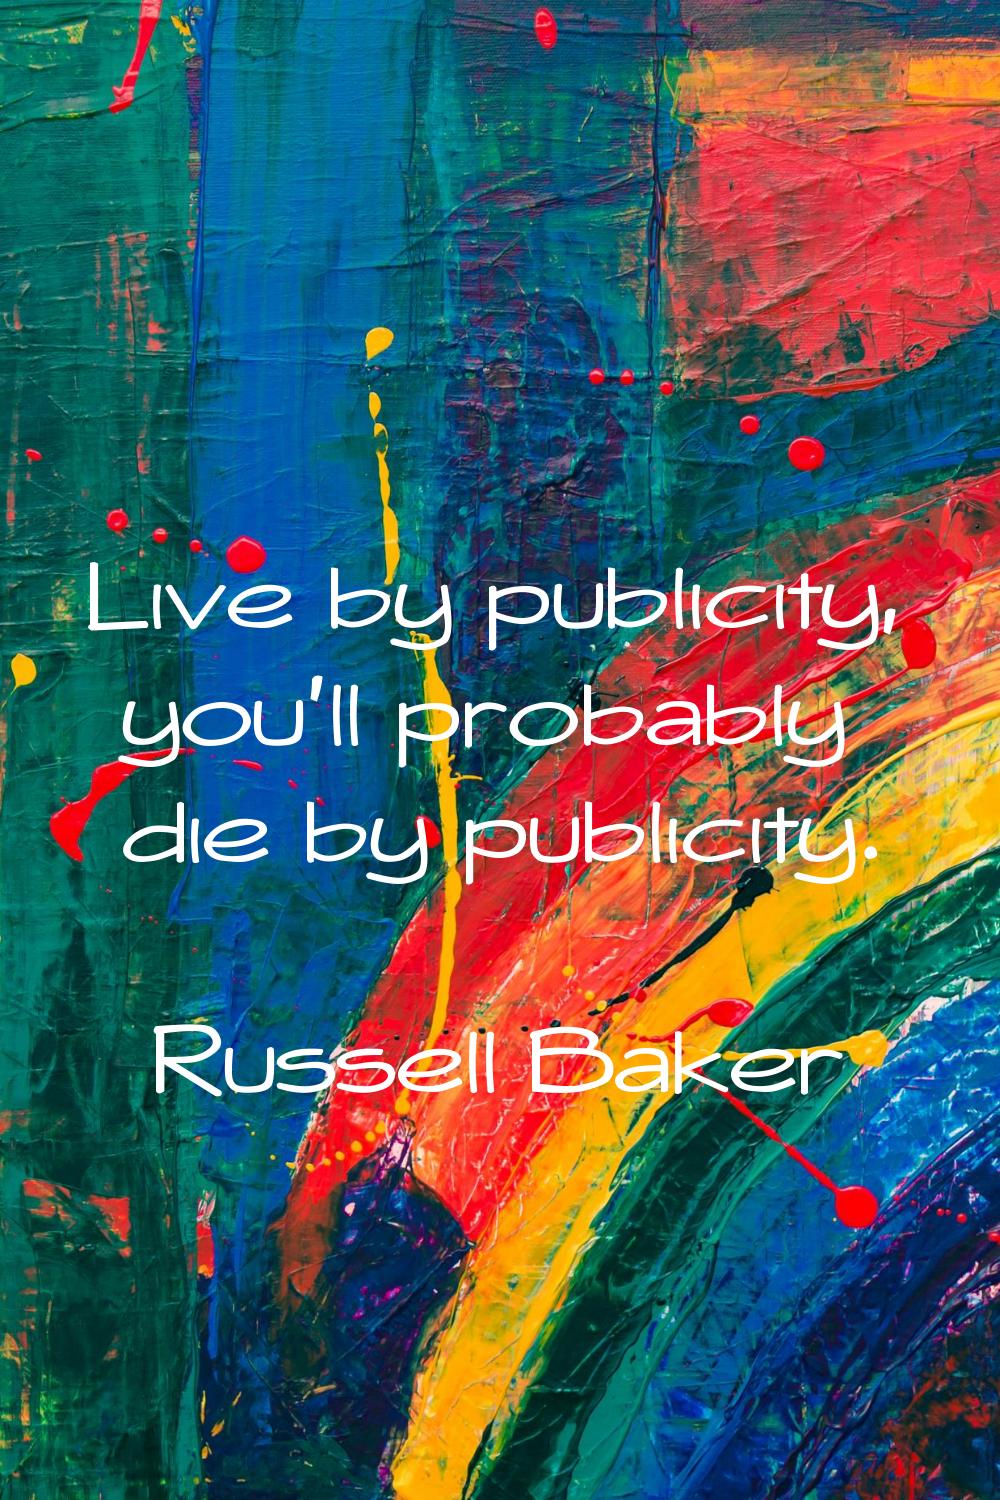 Live by publicity, you'll probably die by publicity.